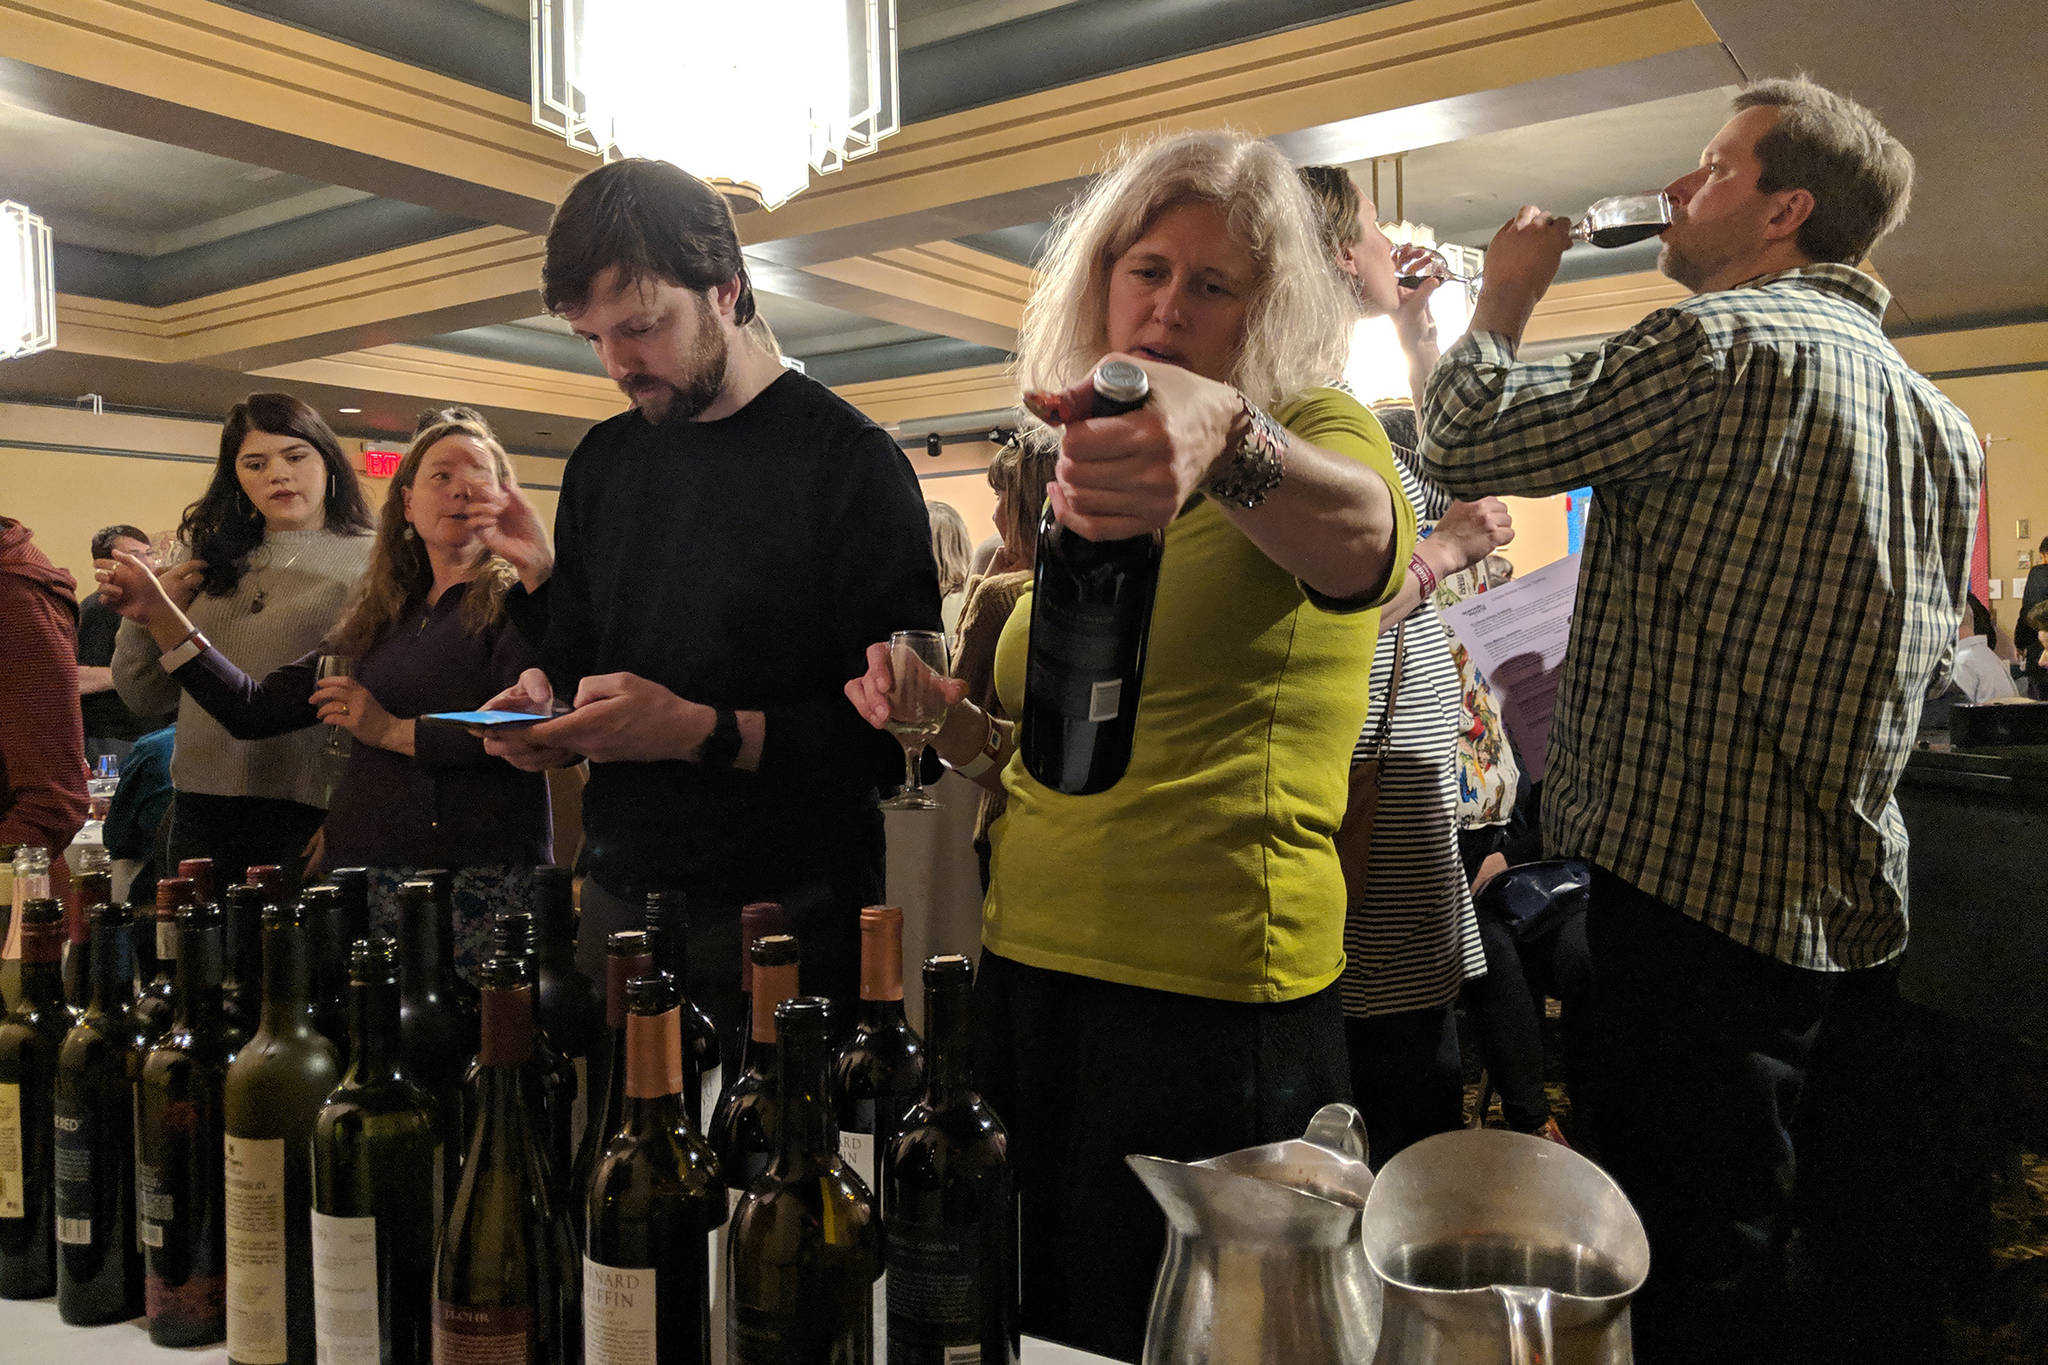 Kirsten Shelton considers a bottle of wine provided by Specialty Imports at a wine and beer tasting and silent auction benefiting Juneau Animal Rescue at the Westmark Baranof Hotel, Saturday, Feb. 9, 2019. (Ben Hohenstatt | Capital City Weekly)